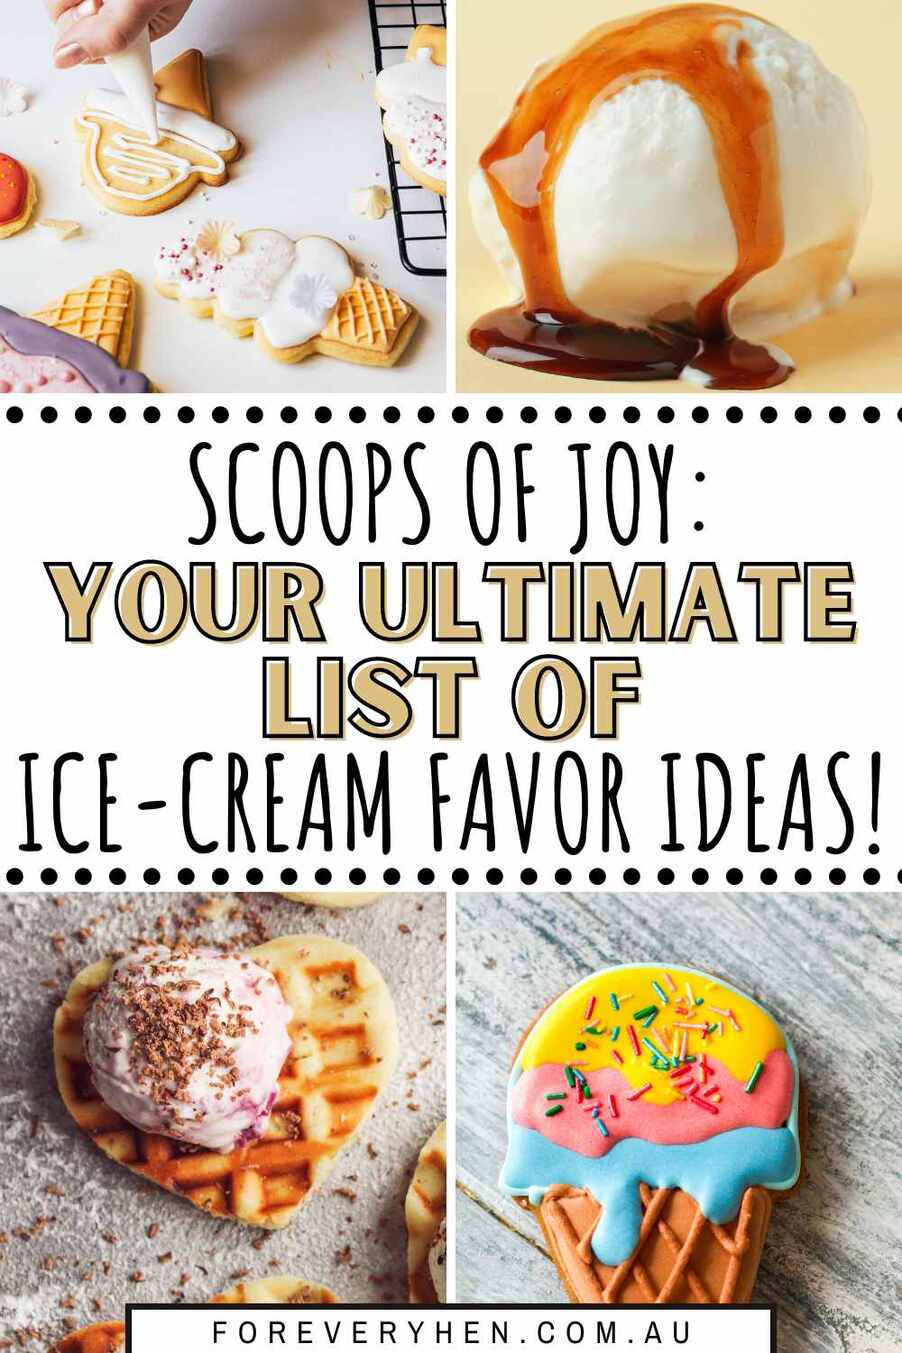 Collage of images featuring ice-cream and ice-cream biscuits. Text overlay: Scoops of joy - your ultimate list of ice cream favor ideas